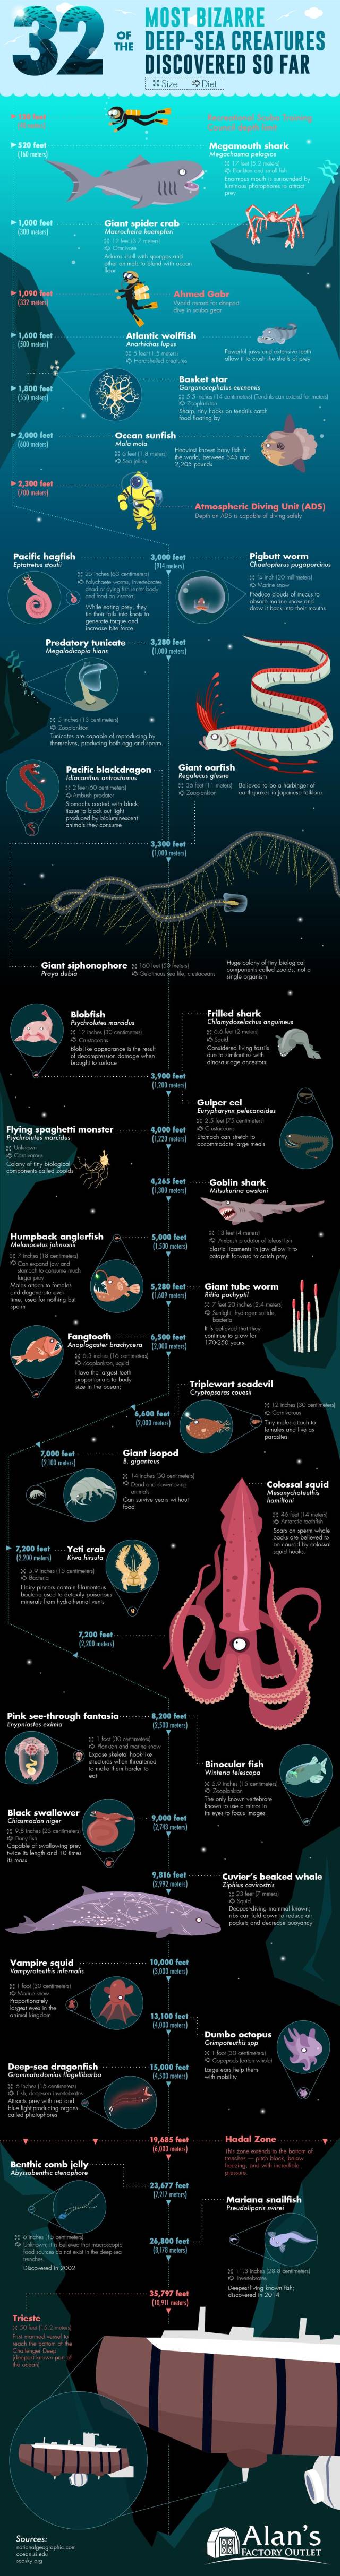 What Hides In Oceanic Depths